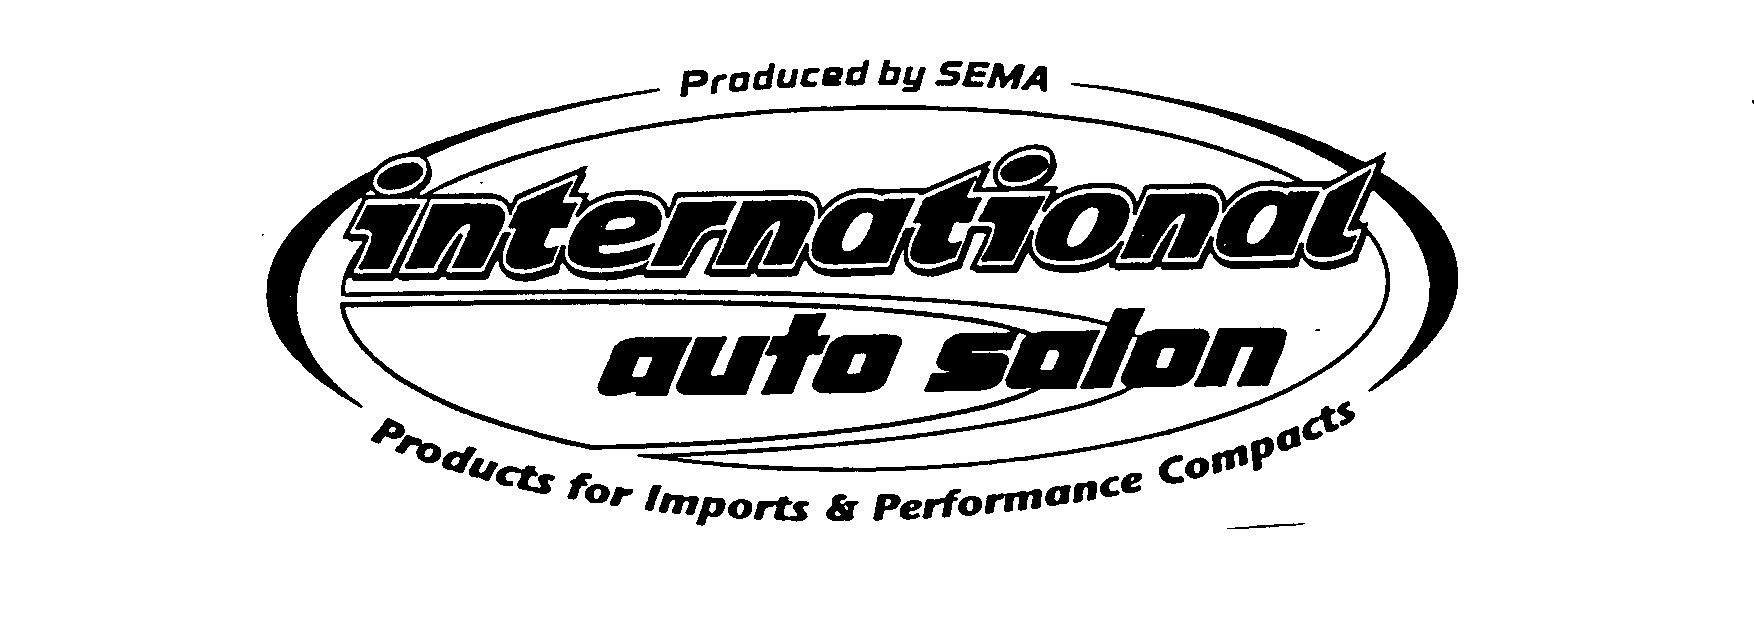  PRODUCED BY SEMA INTERNATIONAL AUTO SALON PRODUCTS FOR IMPORTS &amp; PERFORMANCE COMPACTS